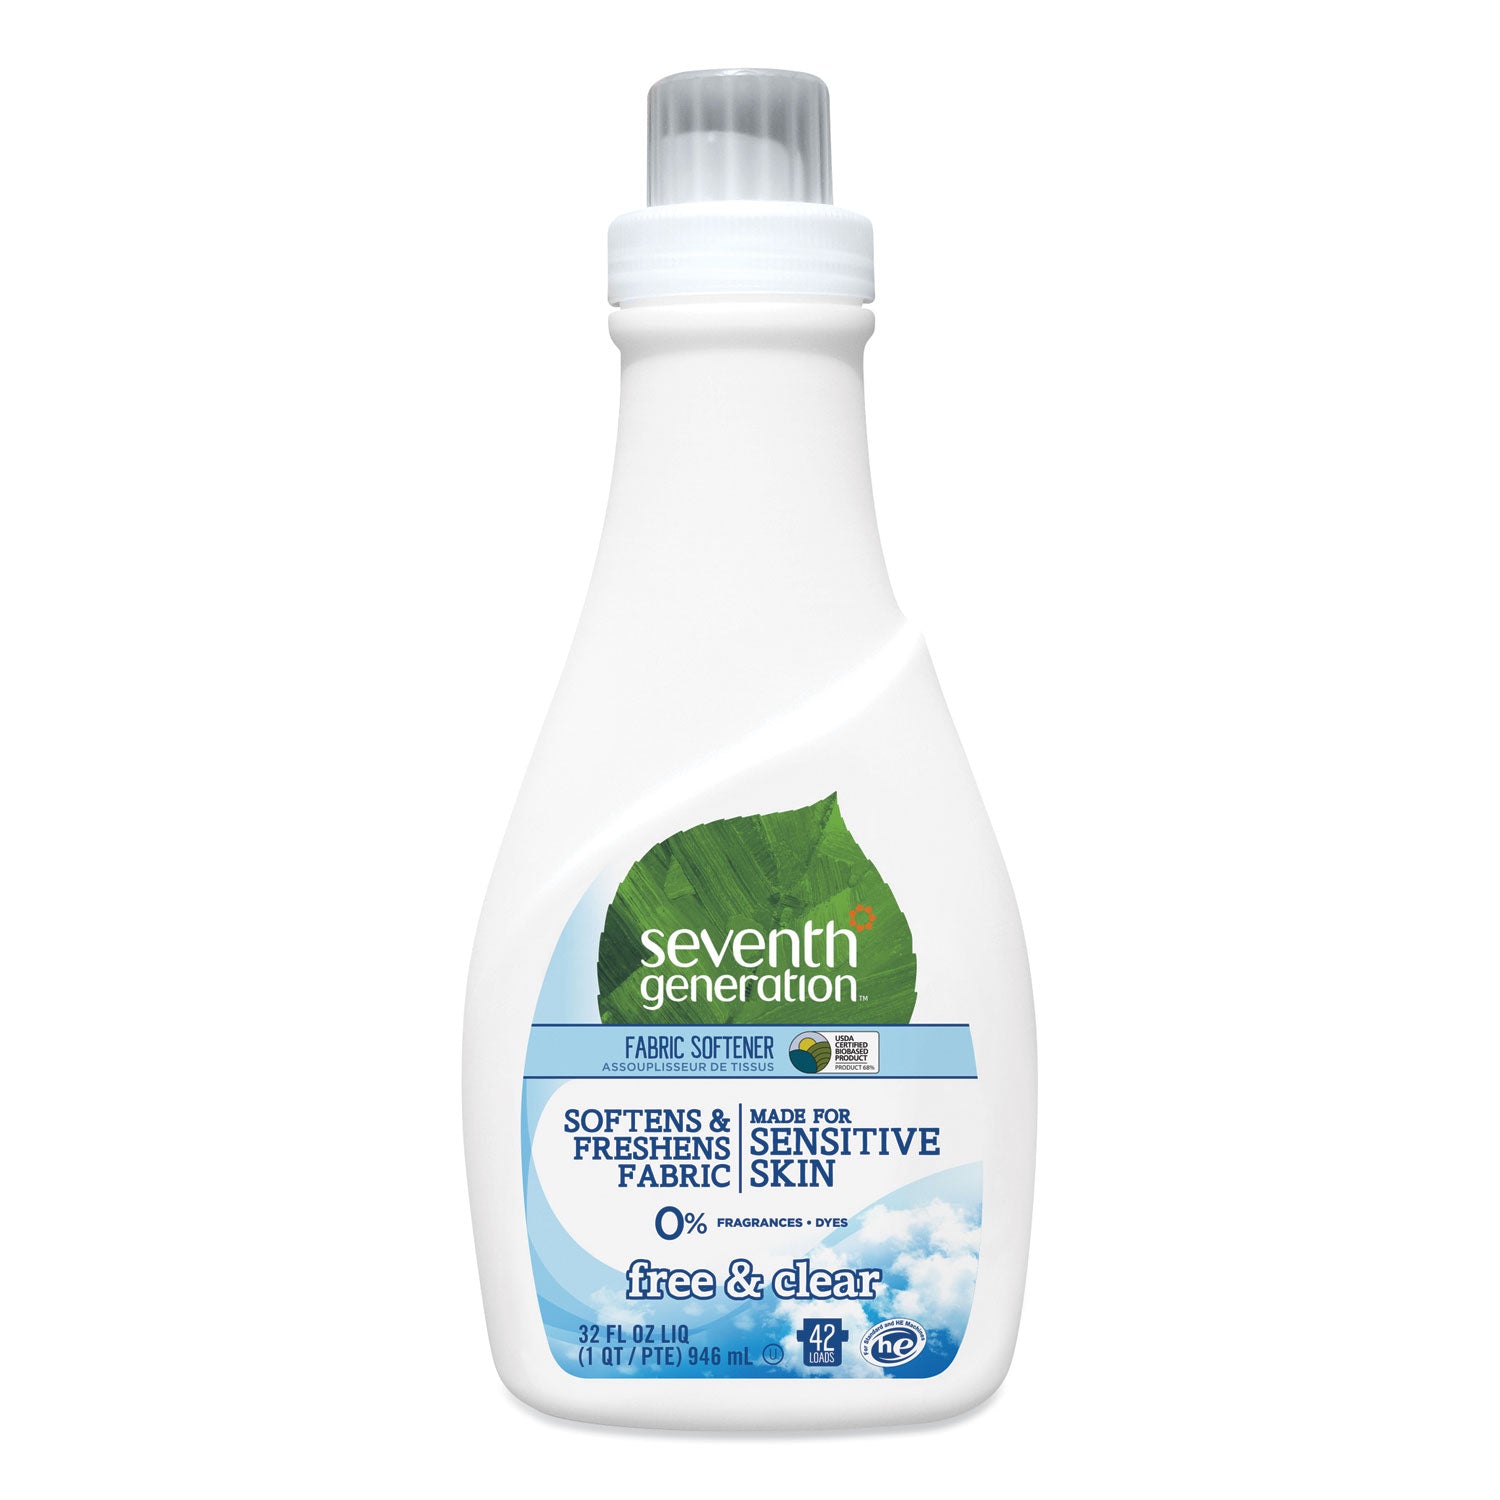 natural-liquid-fabric-softener-free-and-clear-unscented-32-oz-bottle_sev22833ea - 1